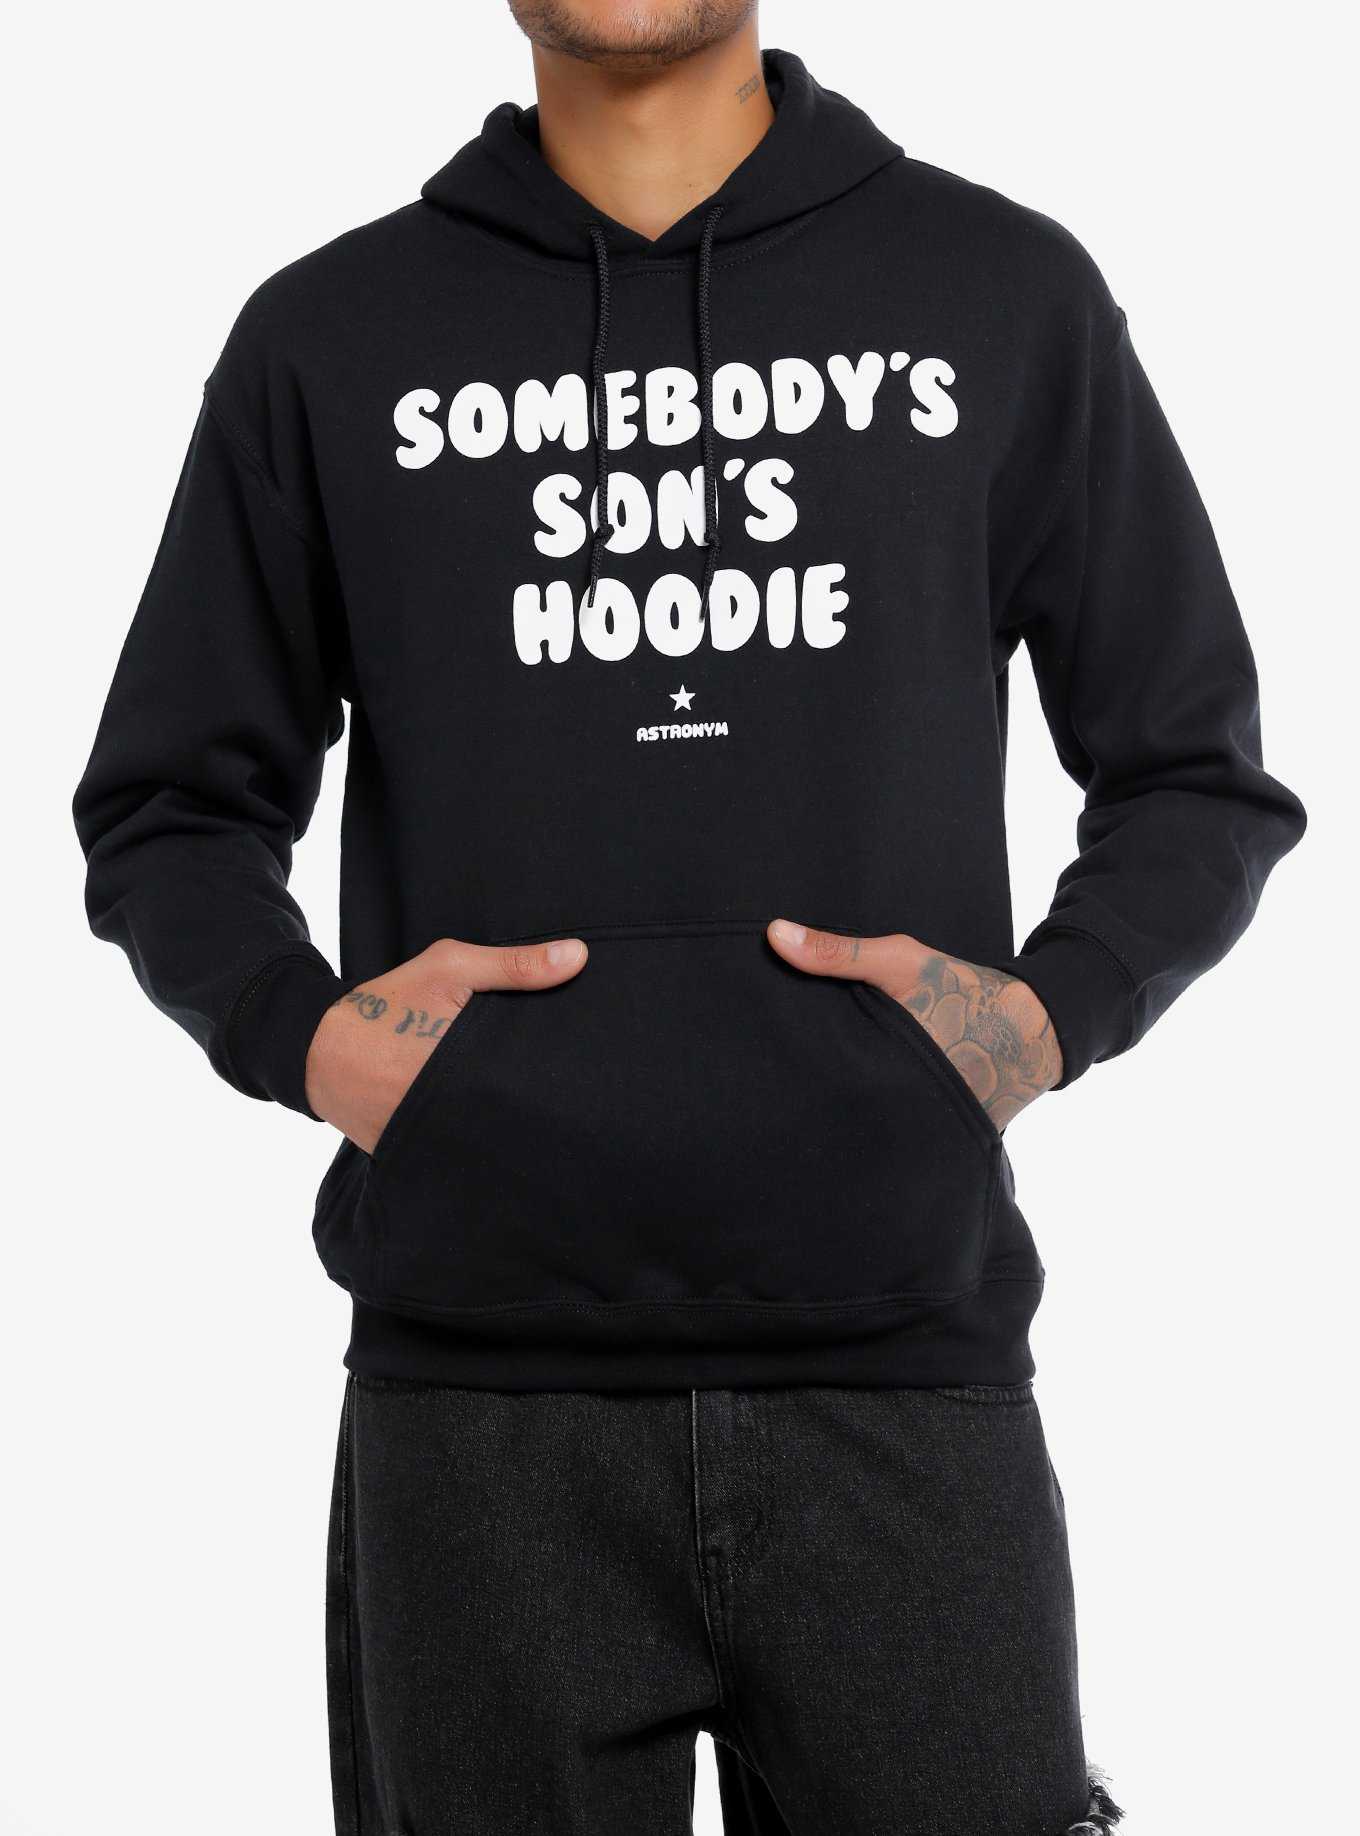 Somebody's Son's Hoodie By Astronym, , hi-res